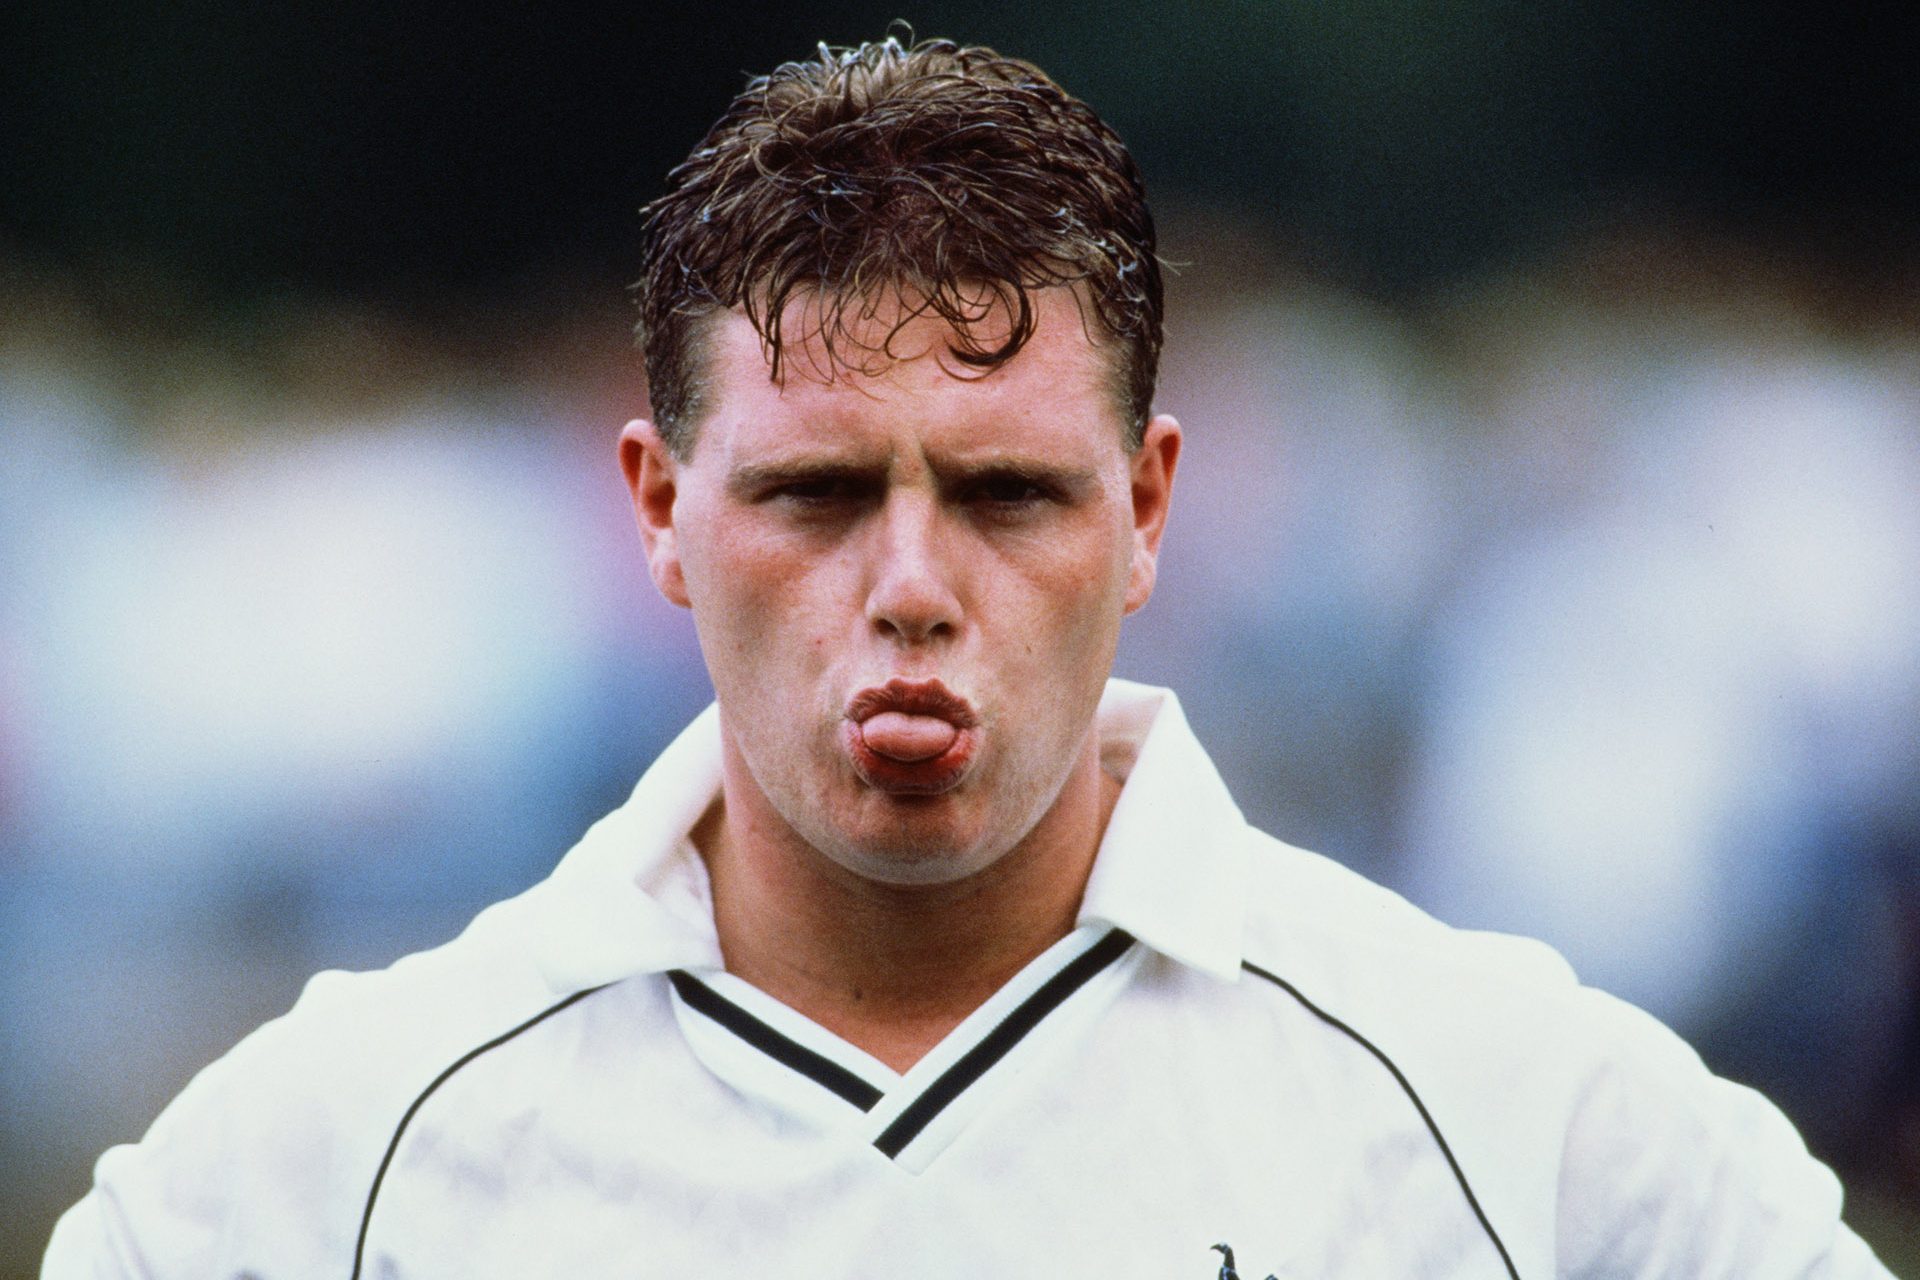 Paul Gascoigne's controversial private life that shook up British football